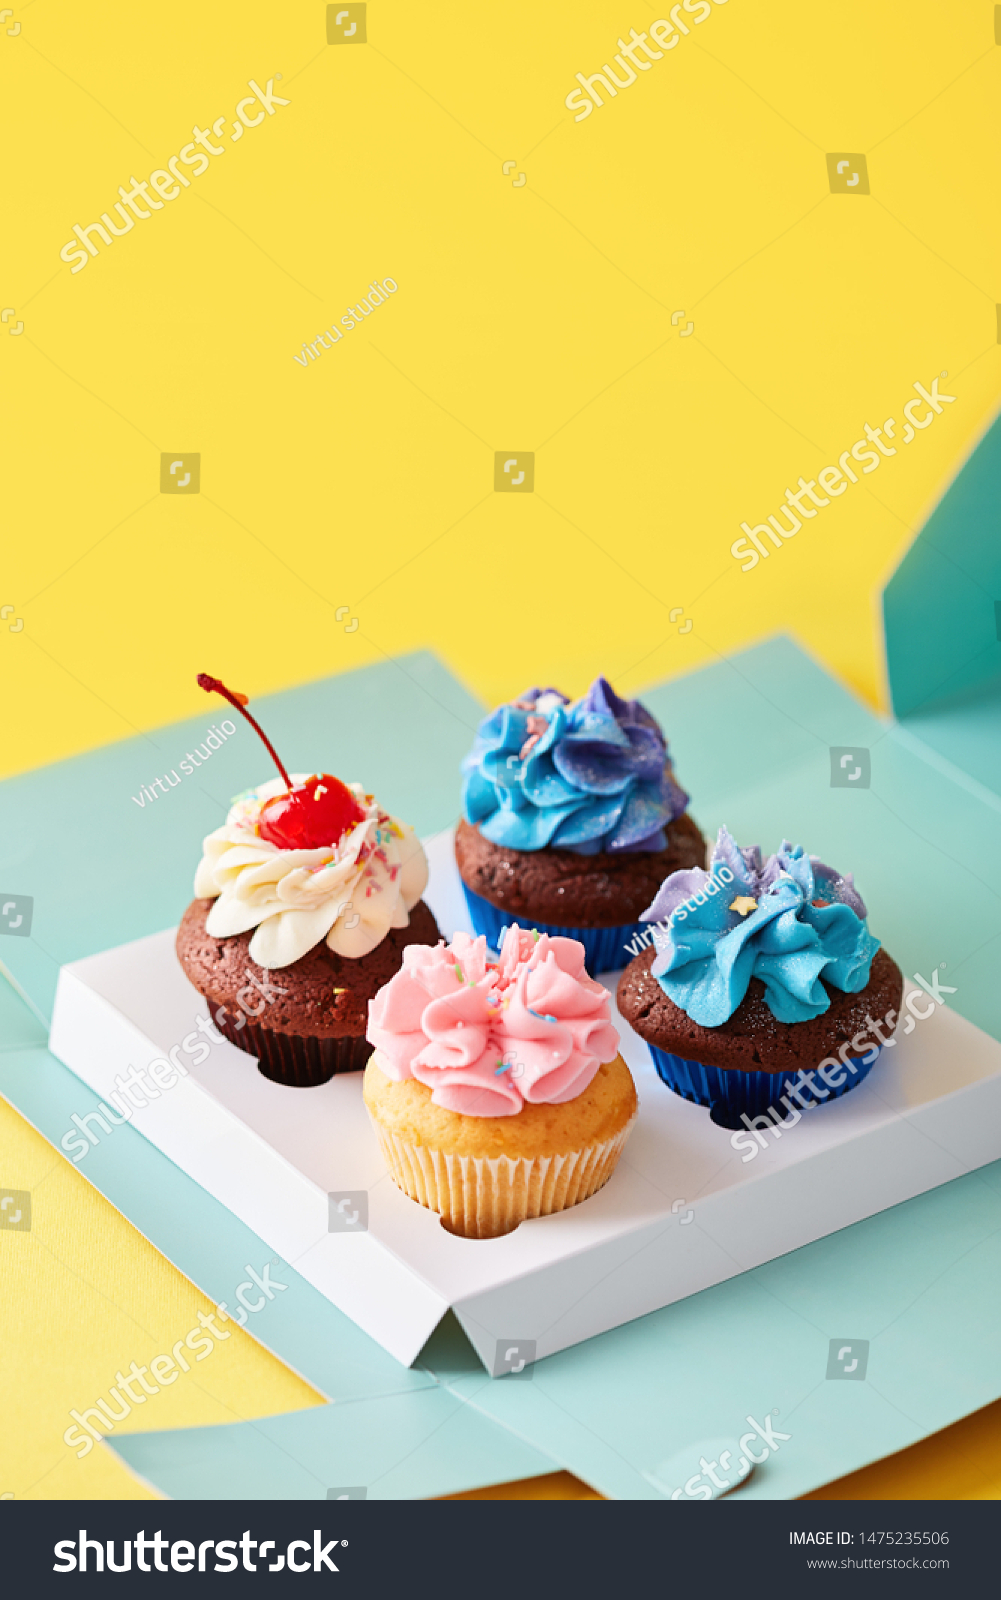 Download Cupcakes Variety Box On Yellow Background Stock Photo Edit Now 1475235506 PSD Mockup Templates